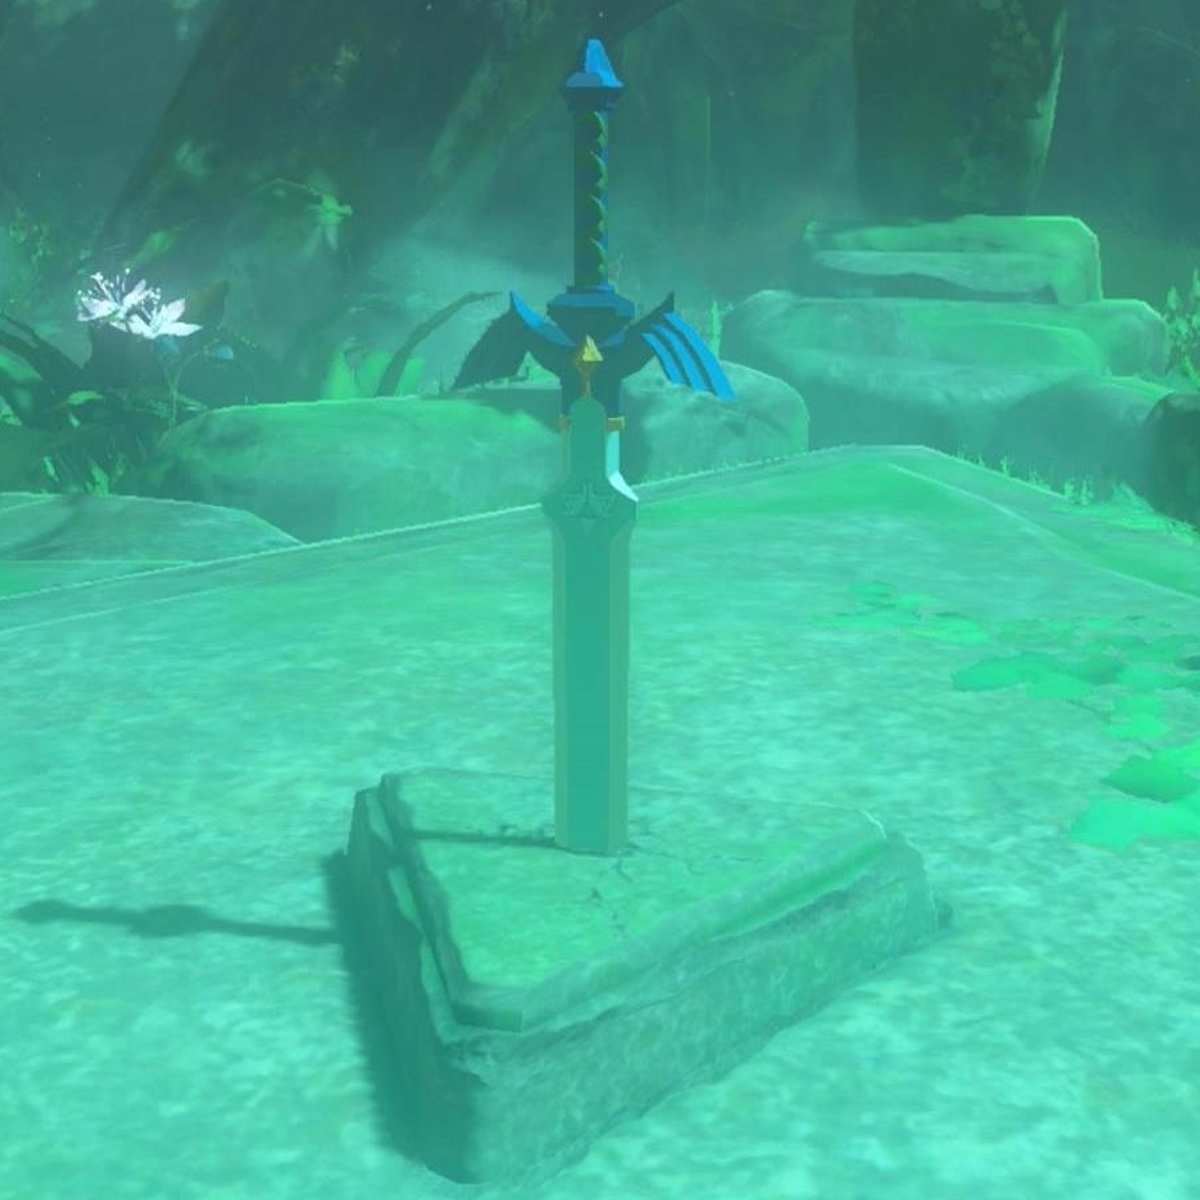 Zelda: Breath of the Wild Master Sword - location of the legendary weapon  and how to complete The Hero's Sword